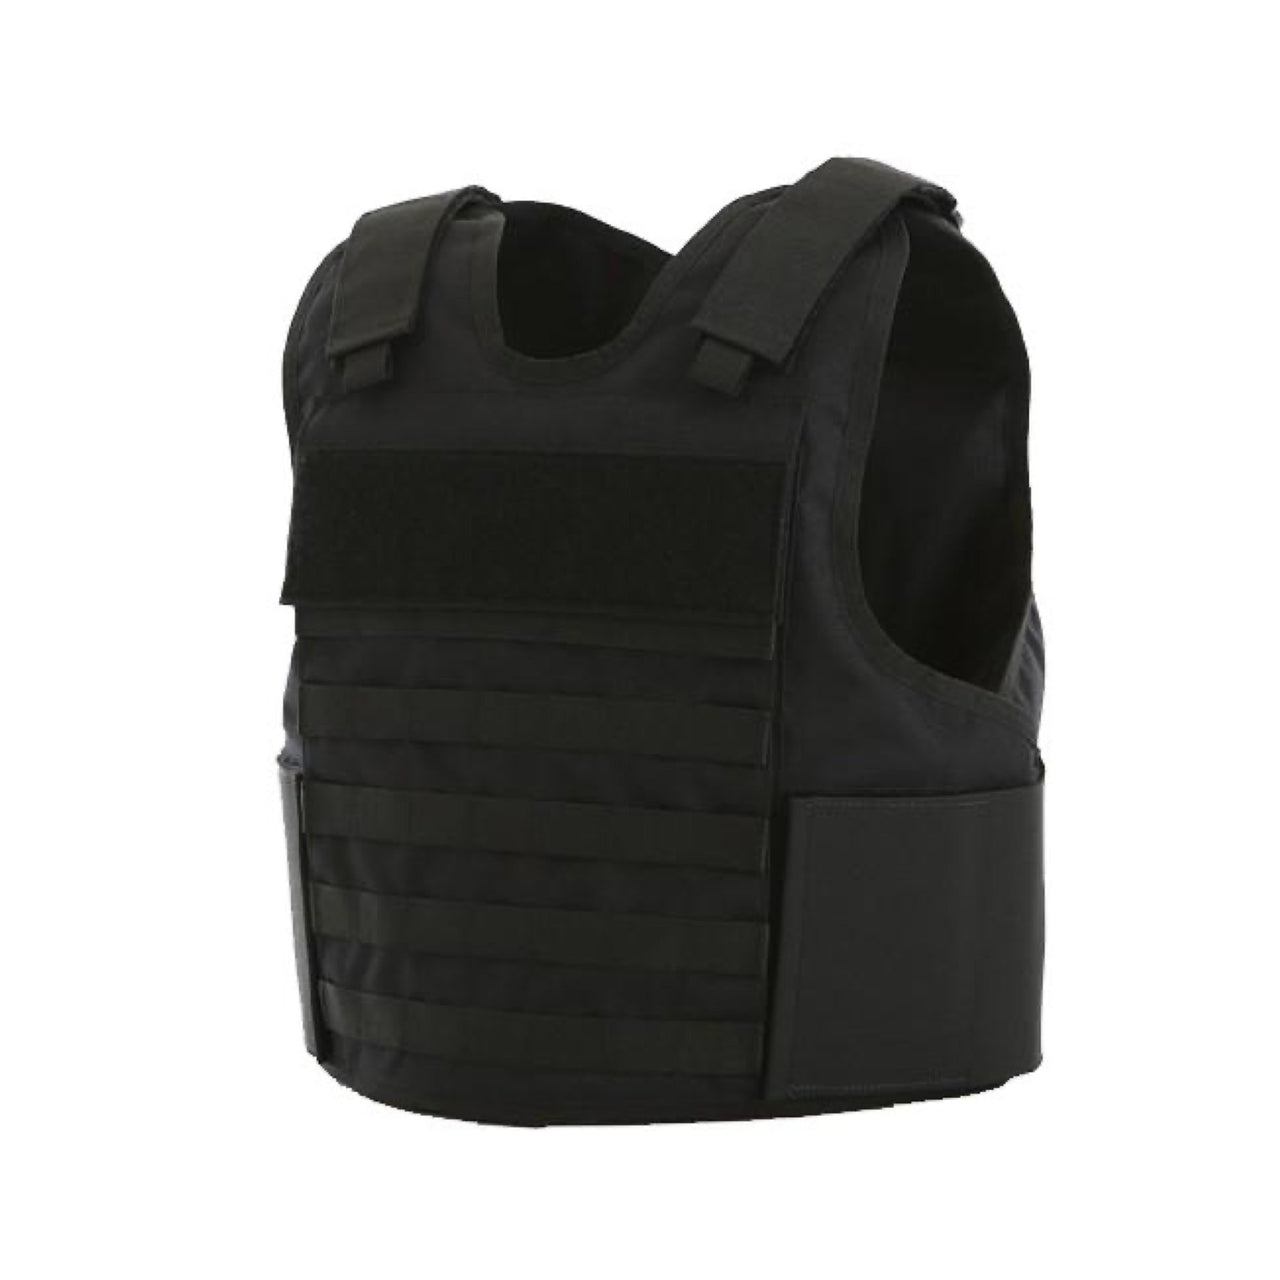 A Body Armor Direct All Star Tactical Outer Carrier on a white background.